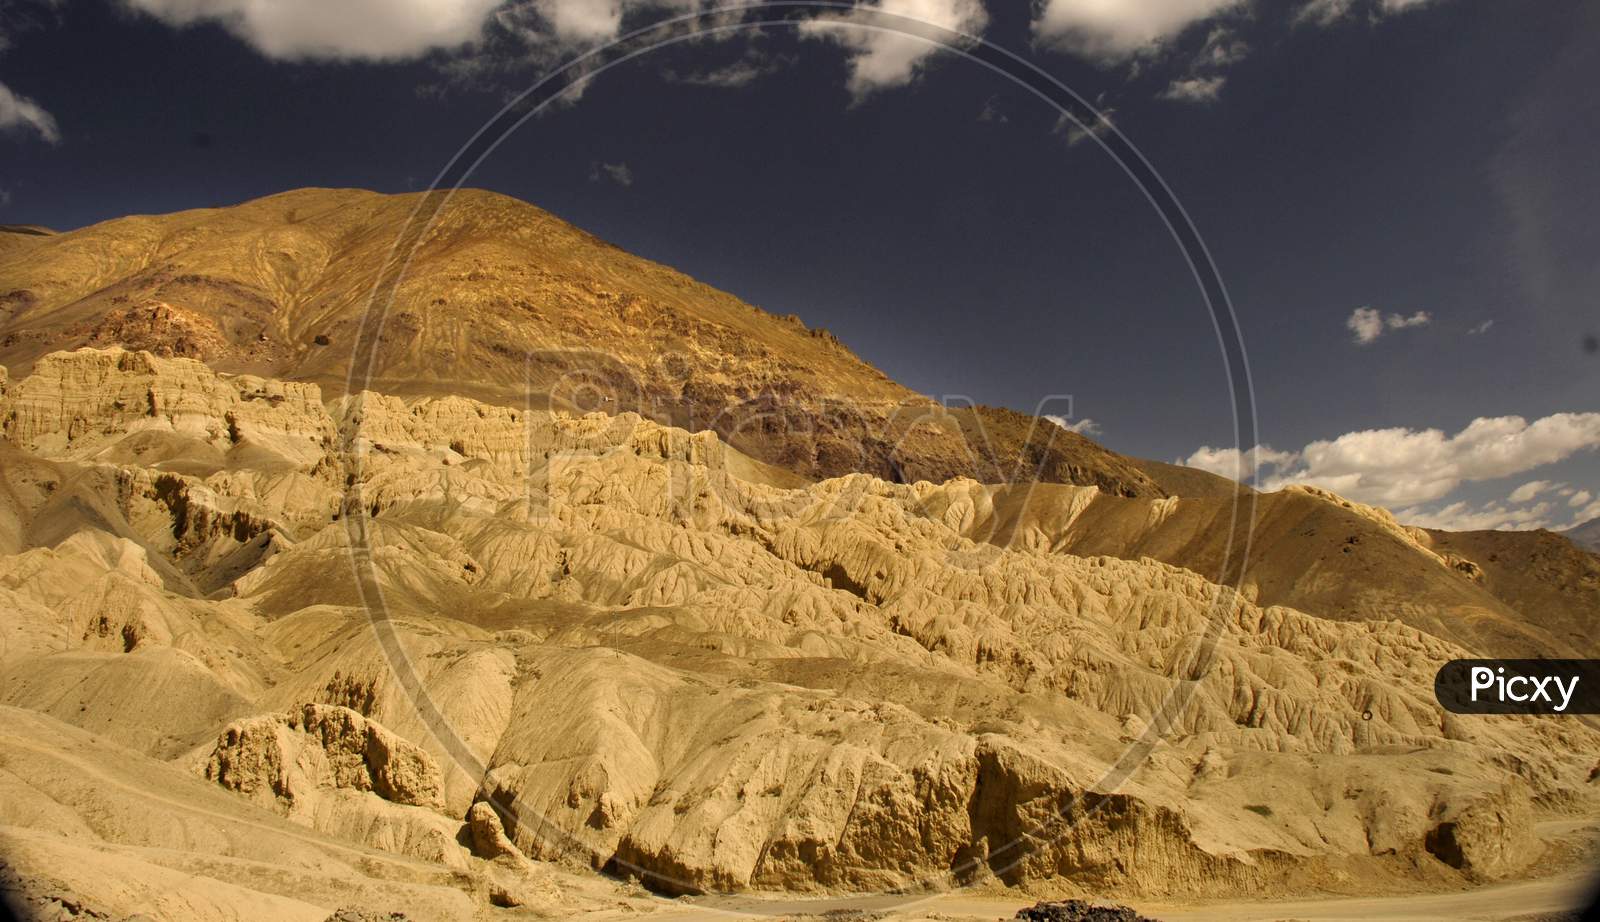 Sand Terrains Or Mountains With Blue Sky Composition In Ladakh